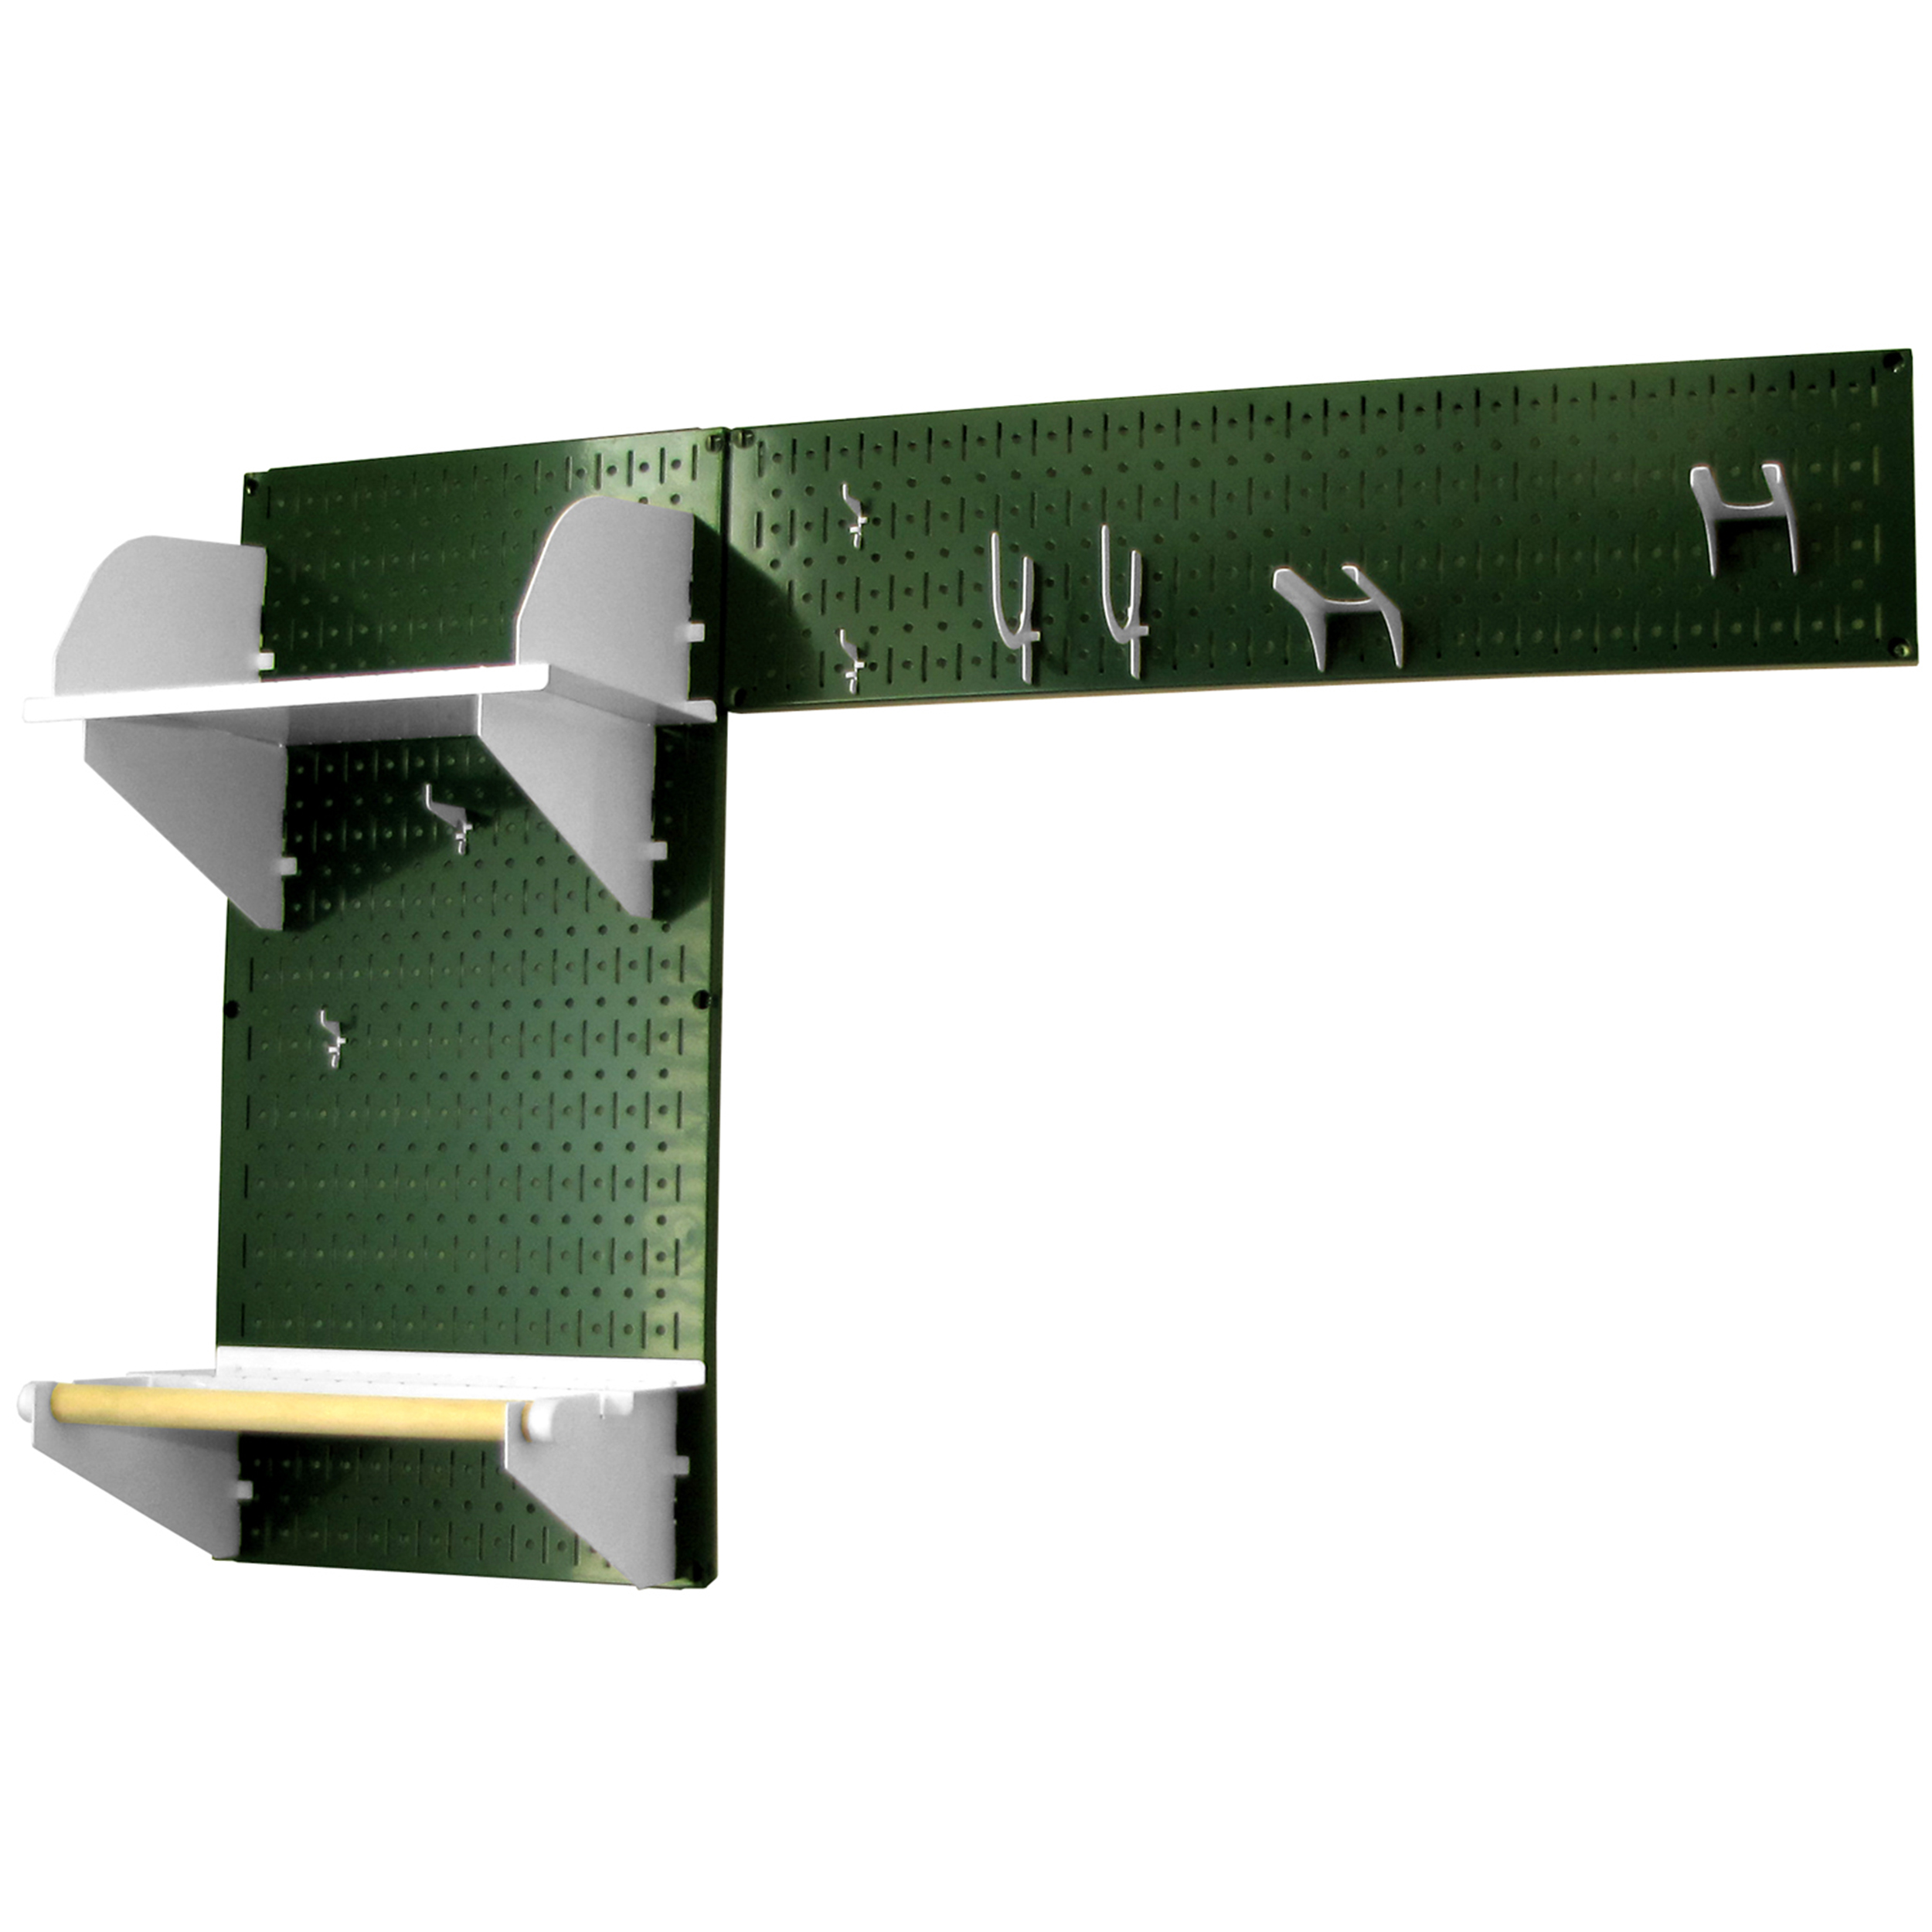 Pegboard Garden Tool Board Organizer With Green Pegboard And White Accessories